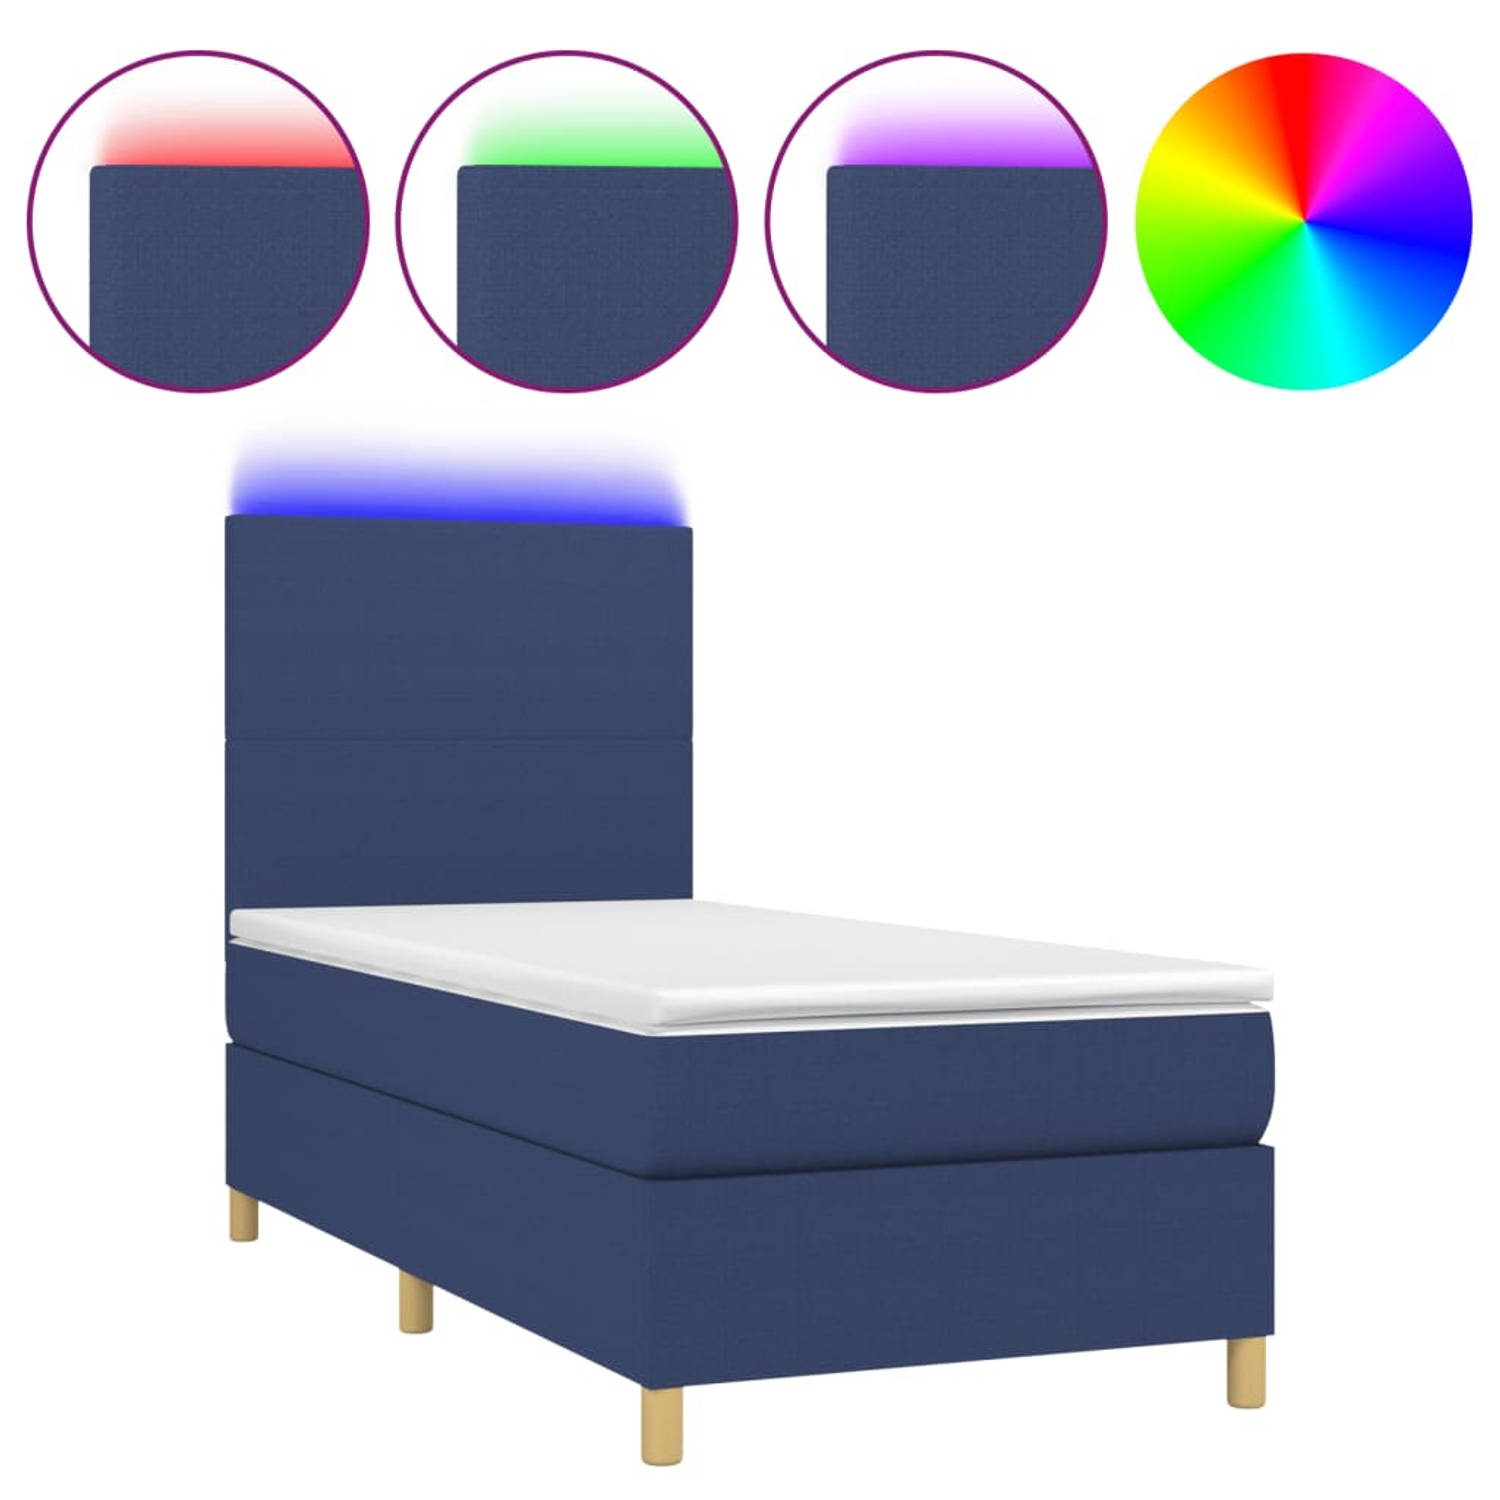 The Living Store Boxspring Bed - Blauw - 193 x 90 x 118/128 cm - Led verlichting